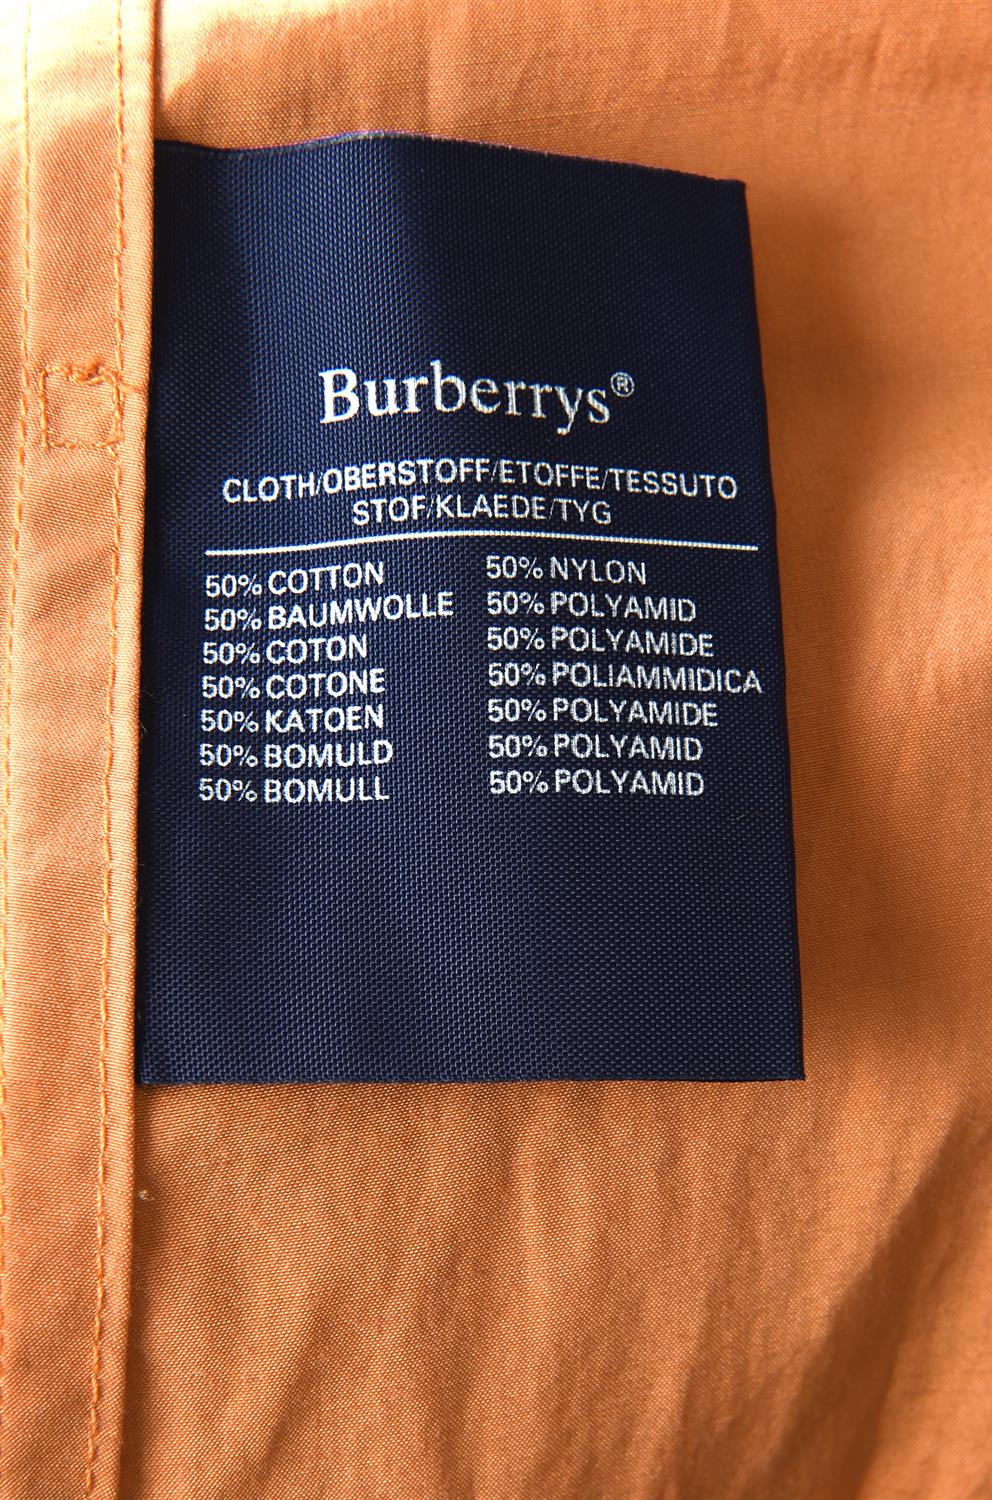 BURBERRYS a ladies vintage 80s/90s iridescent tangerine-coloured cotton and nylon trench coat UK 10 - Image 8 of 9